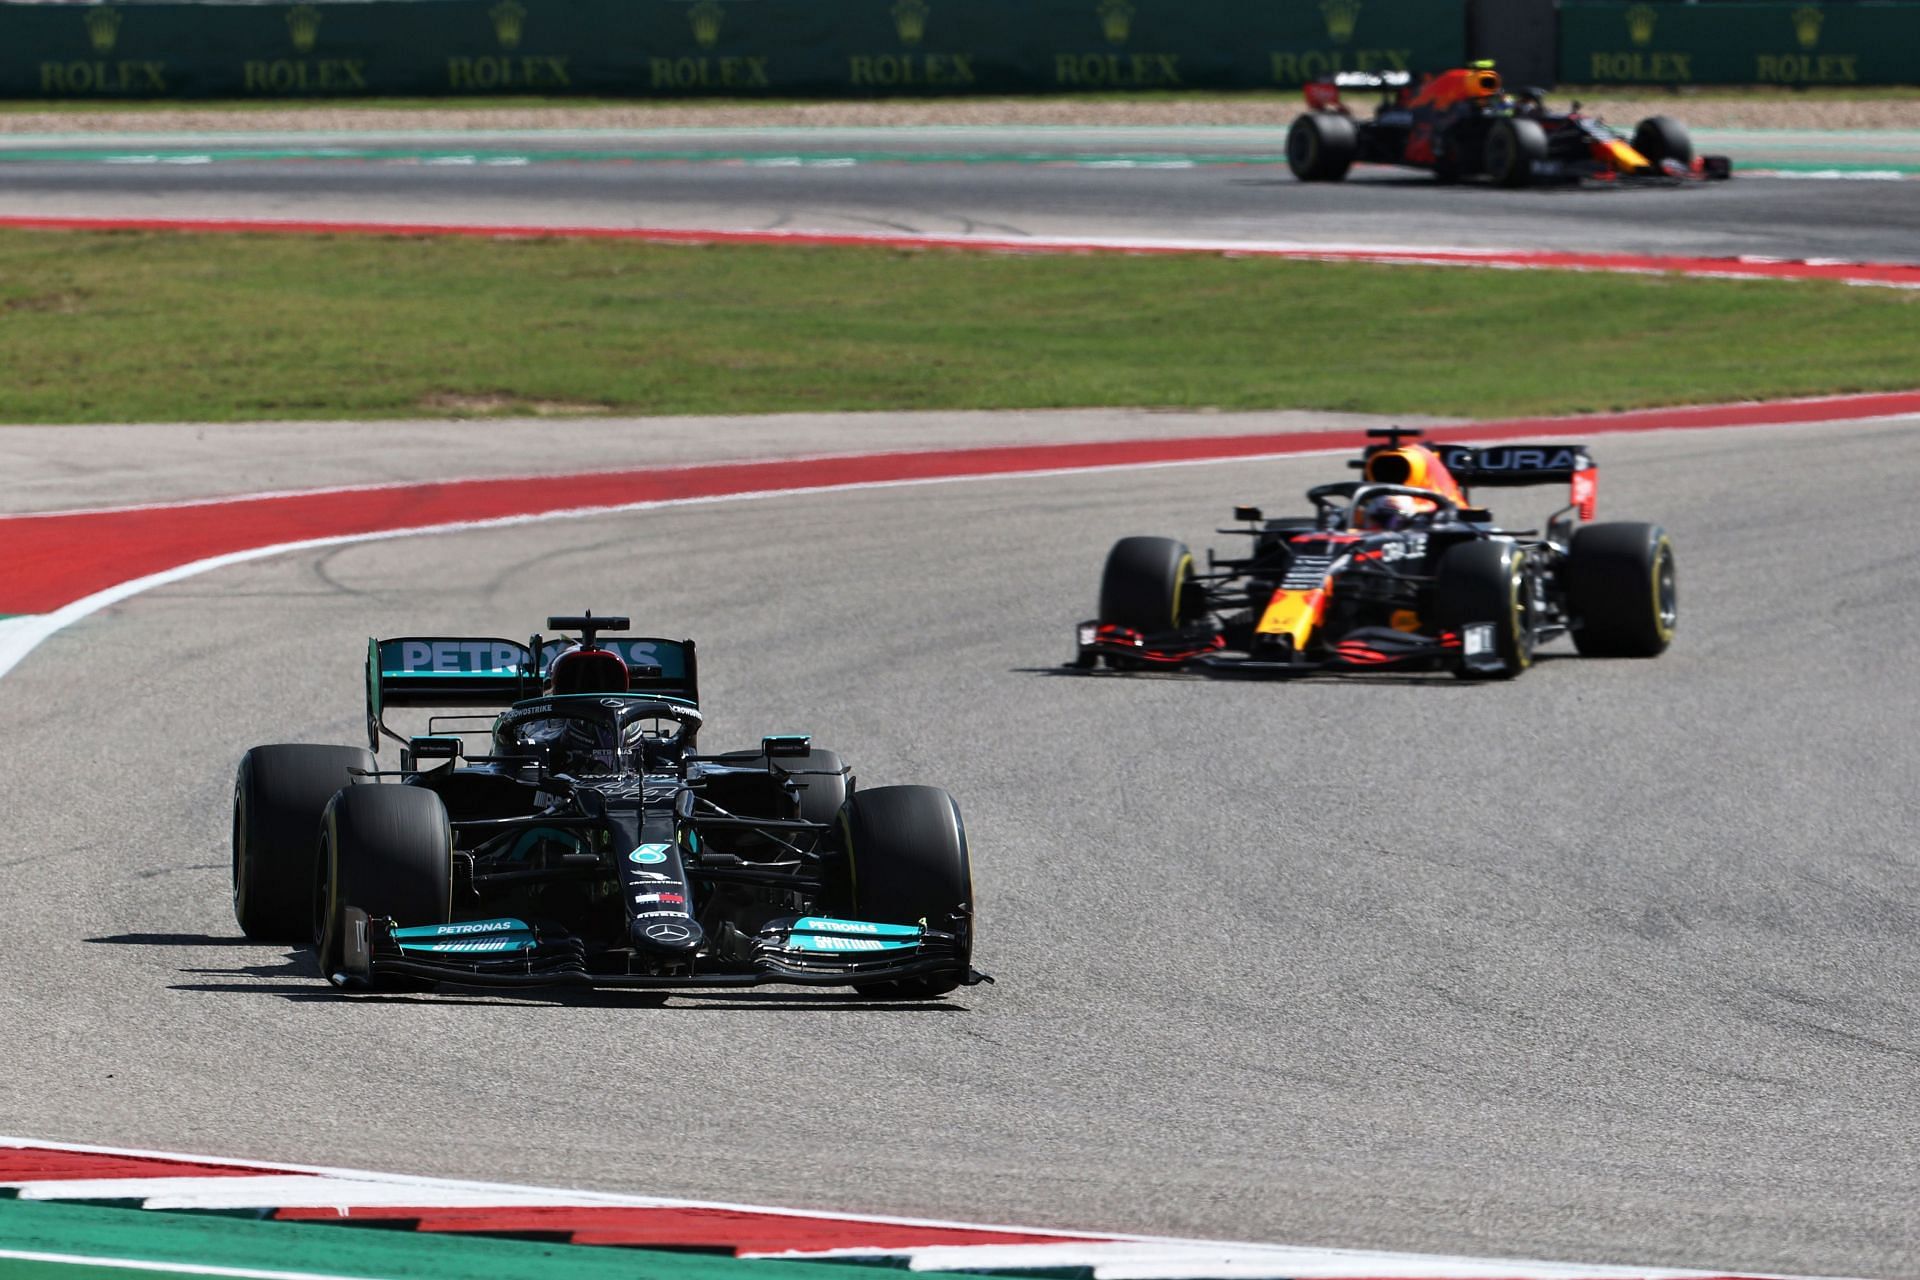 Lewis Hamilton (left) and Max Verstappen (right) (Photo by Chris Graythen/Getty Images)